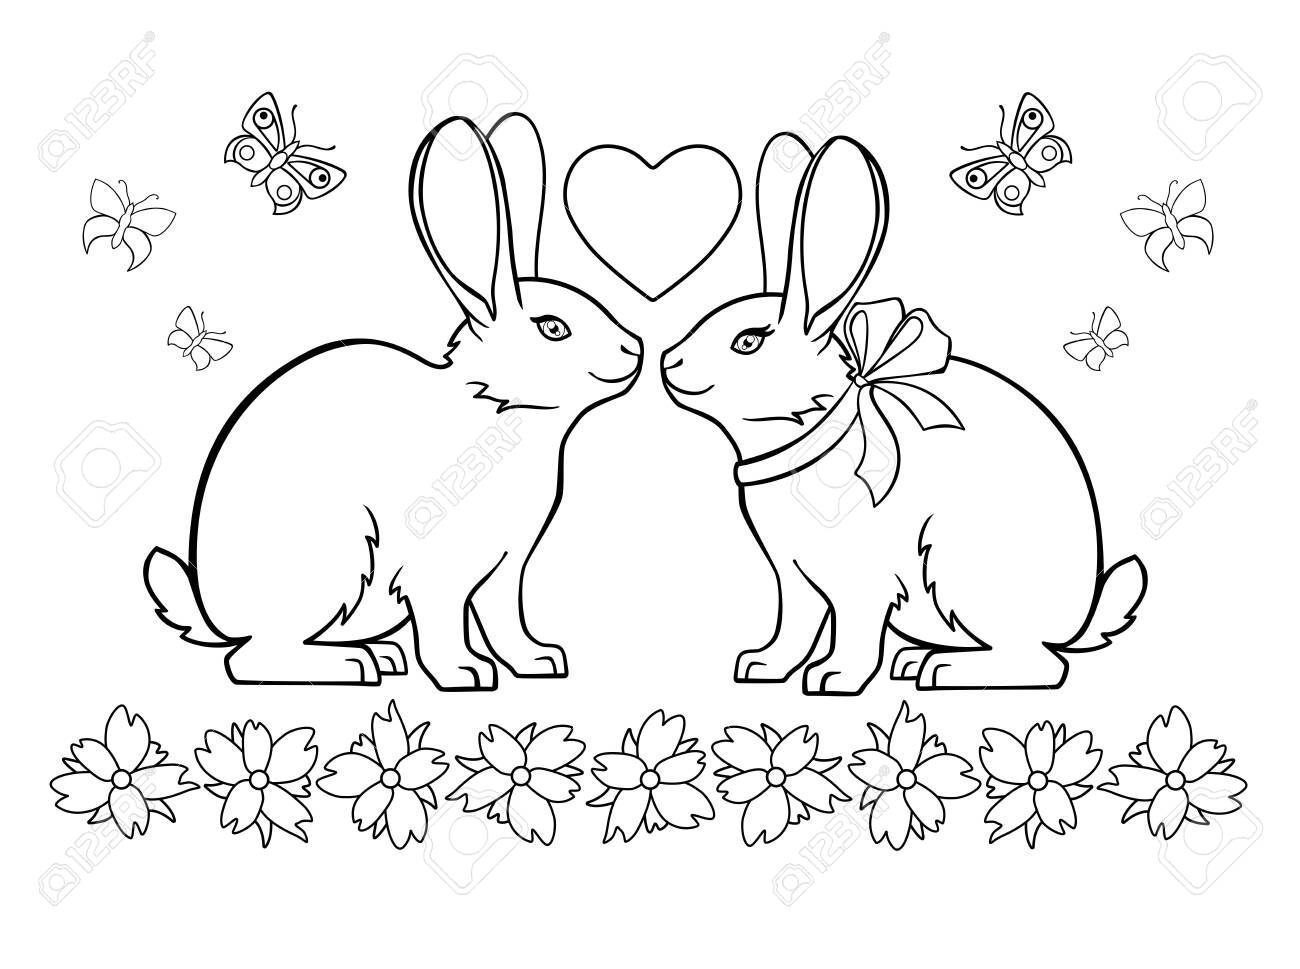 A pair of loving rabbits surrounded by flowers and butterflies